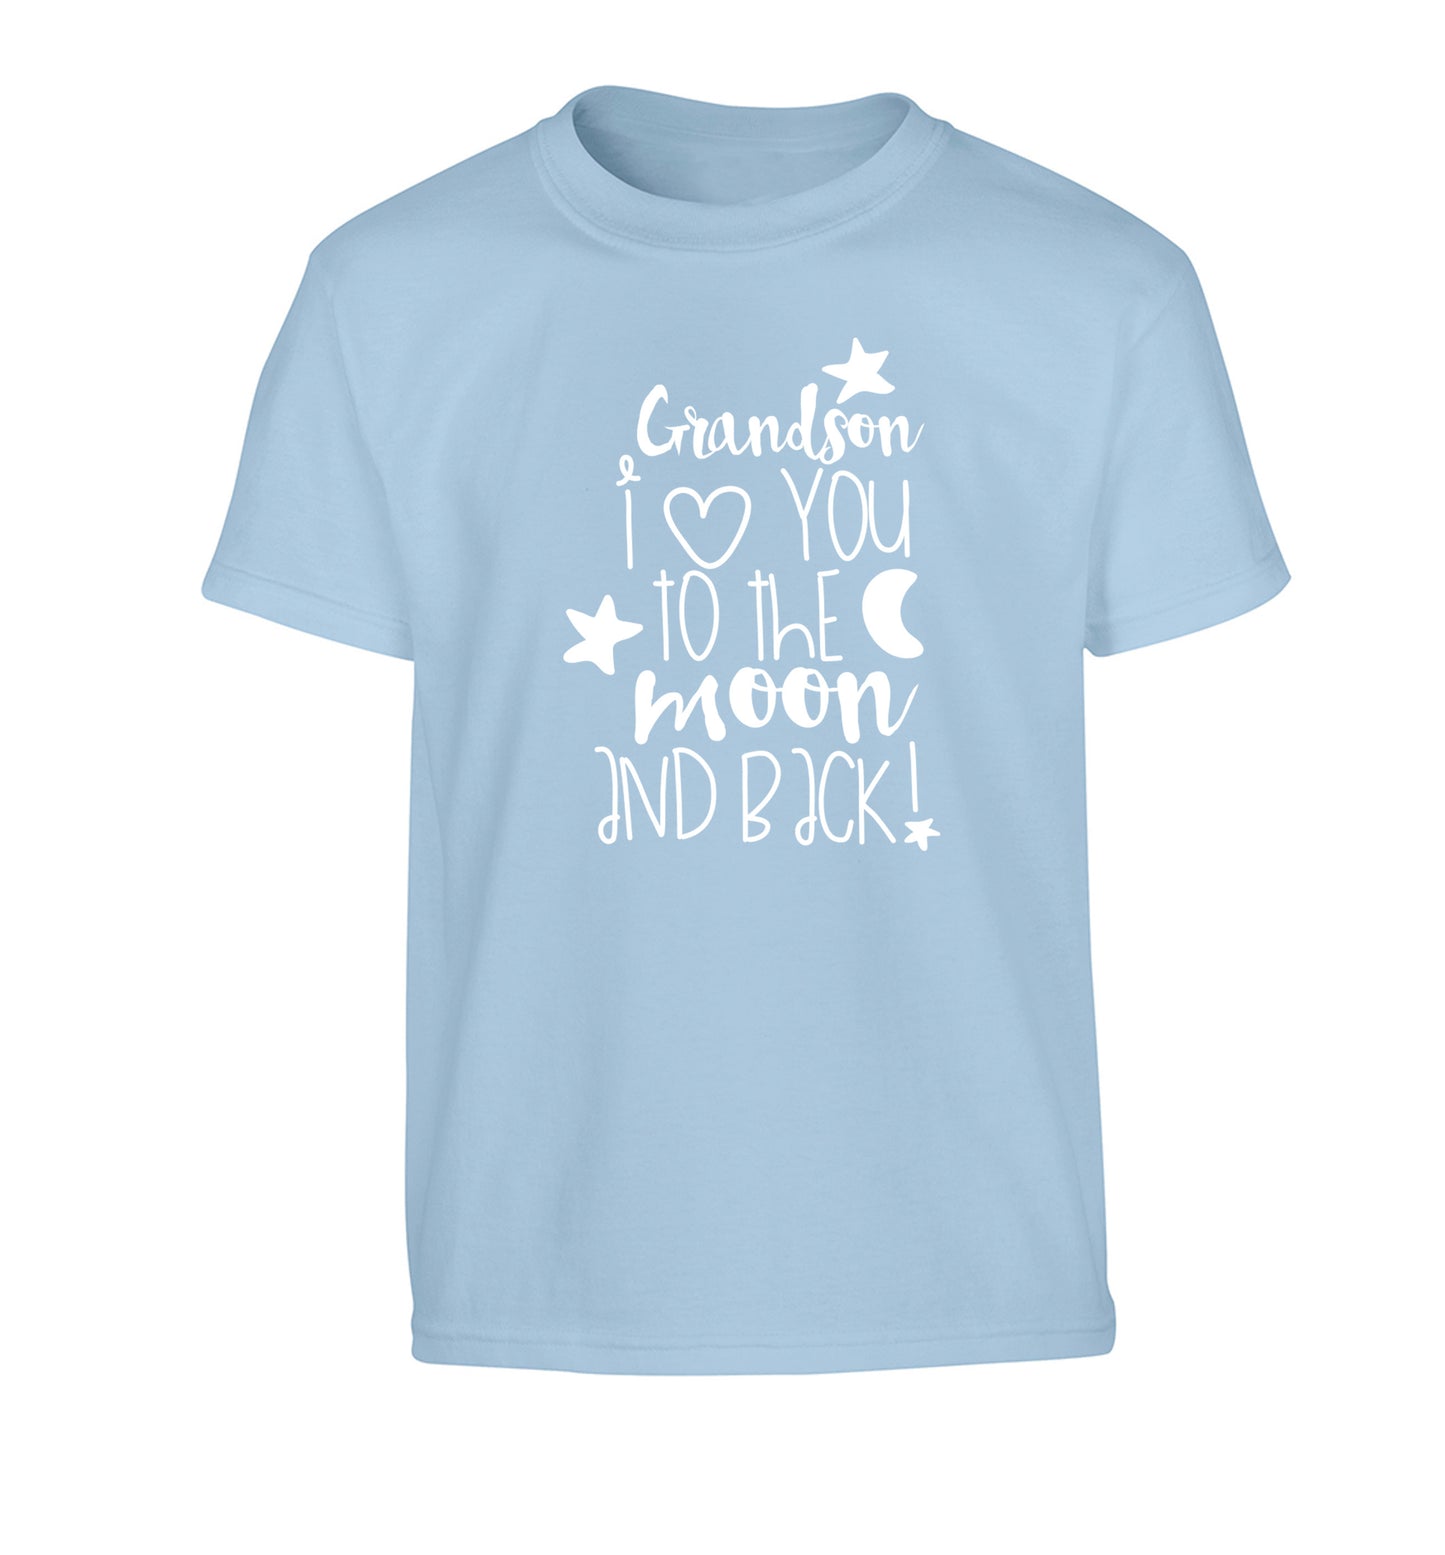 Grandson I love you to the moon and back Children's light blue Tshirt 12-14 Years